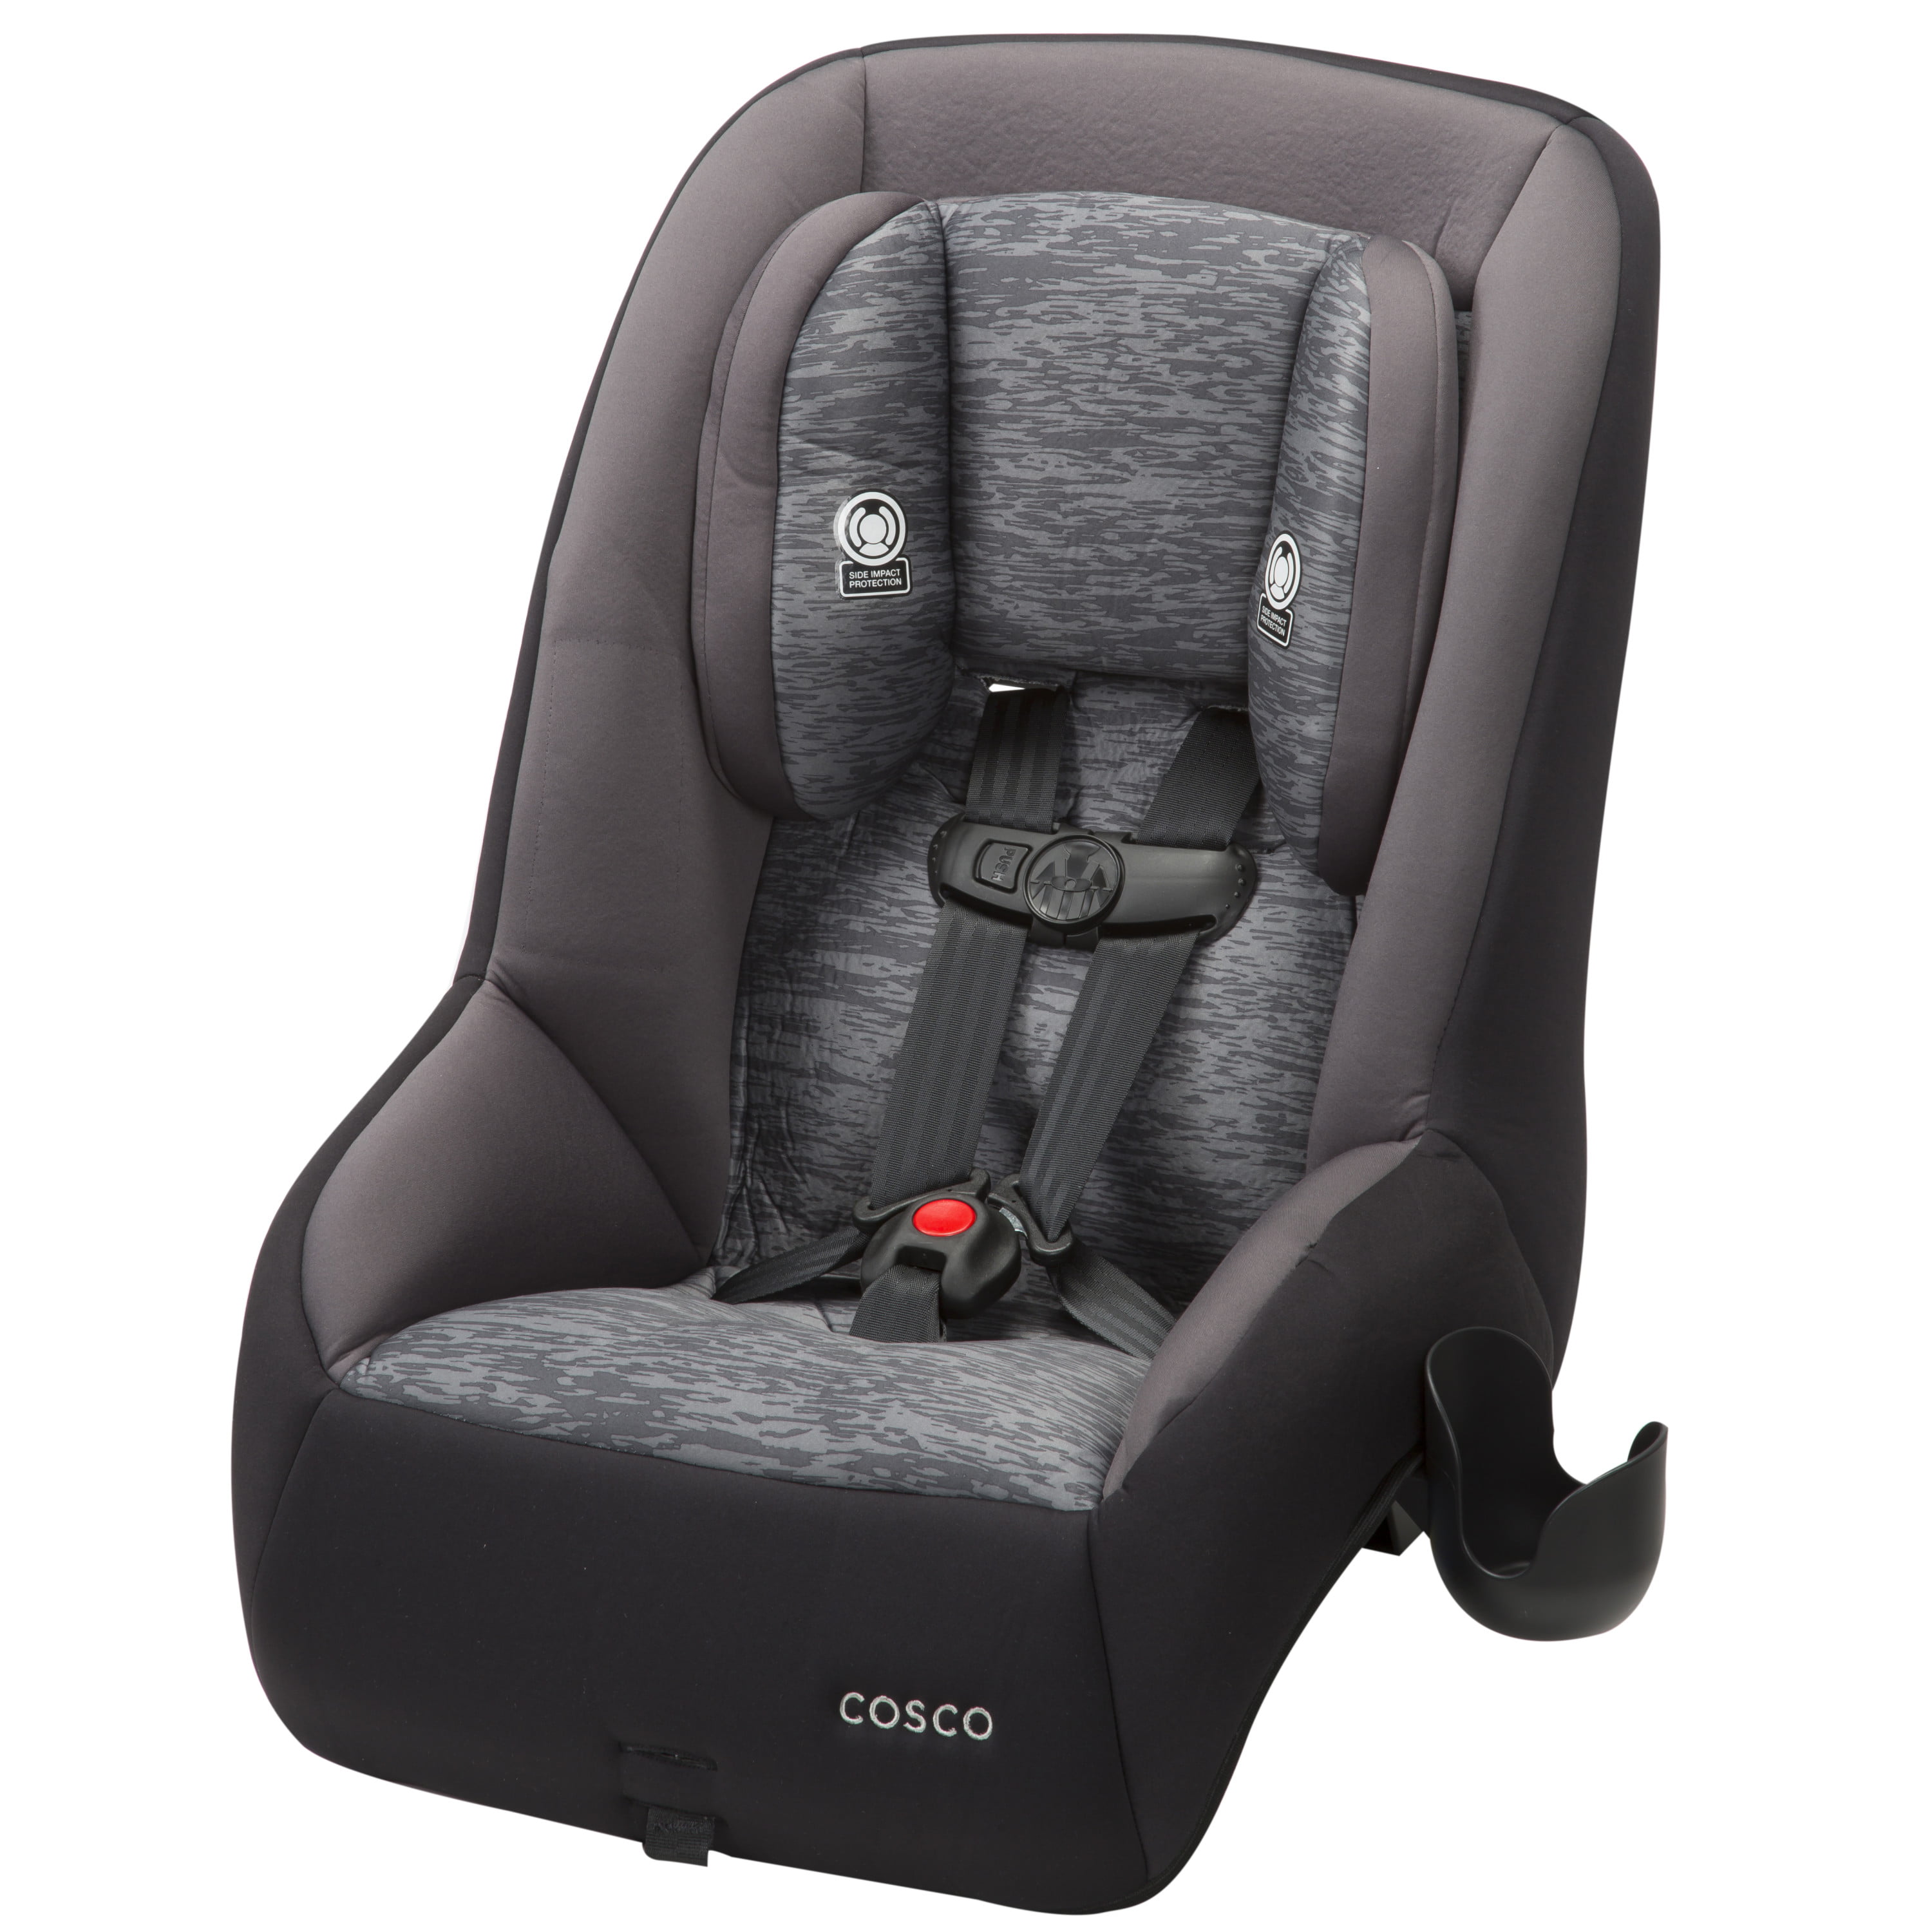 Photo 1 of Cosco Mighty Fit Convertible Car Seat - Heather Onyx, Box Packaging Damaged, Minor Use, Minor Scratches and Scuffs
